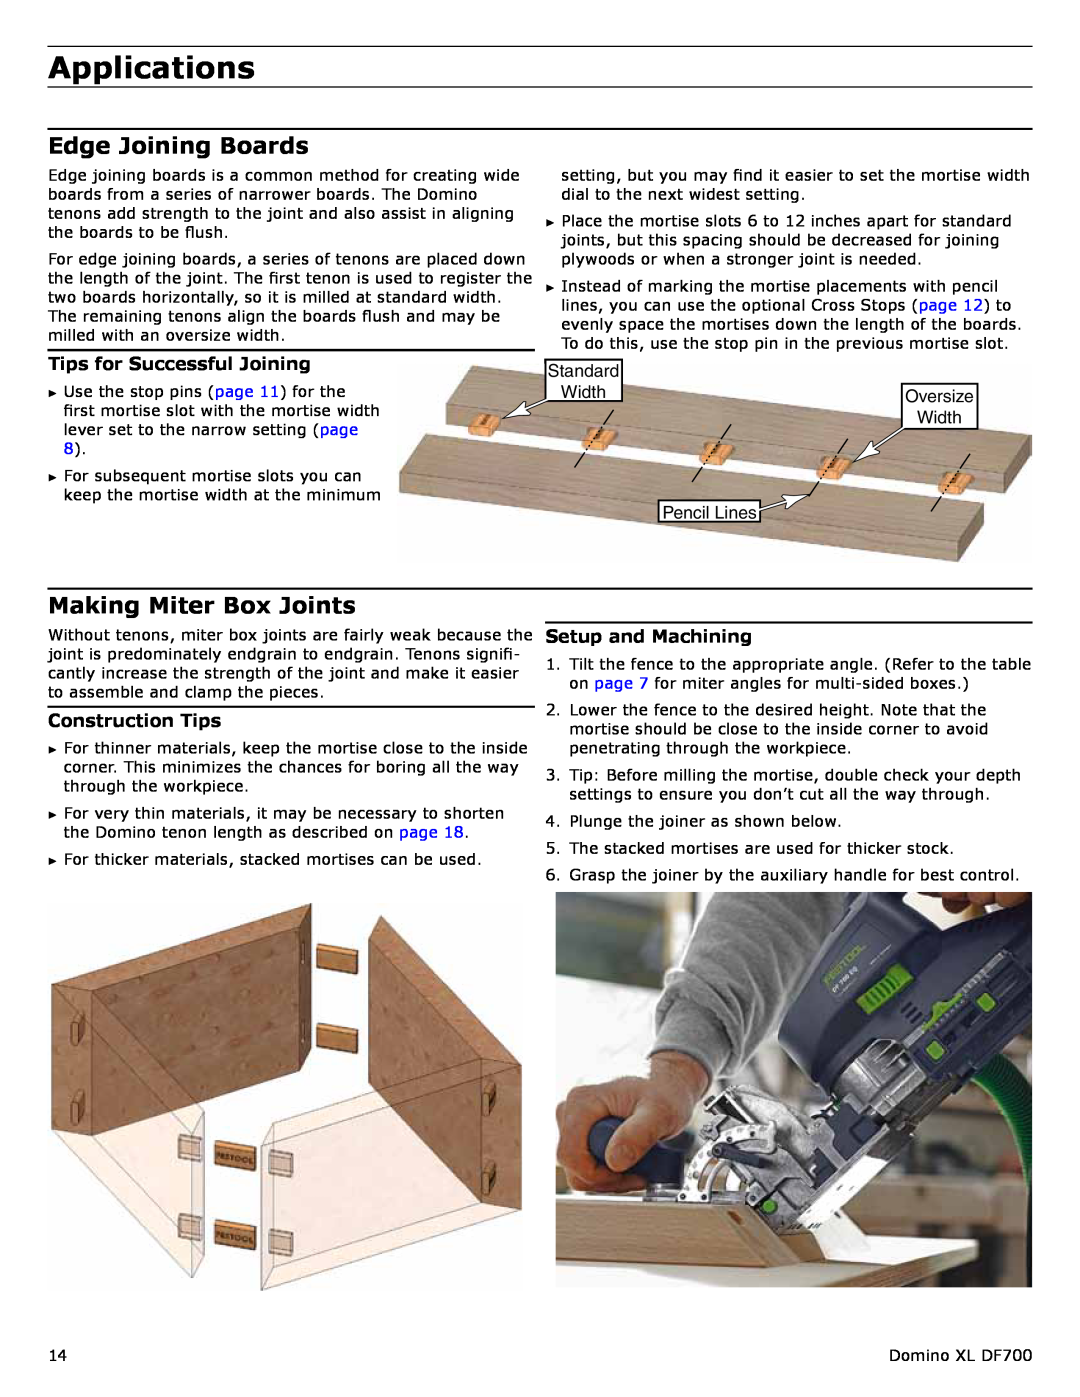 Festool PI574422, PI574447 Applications, Edge Joining Boards, Making Miter Box Joints, Tips for Successful Joining 